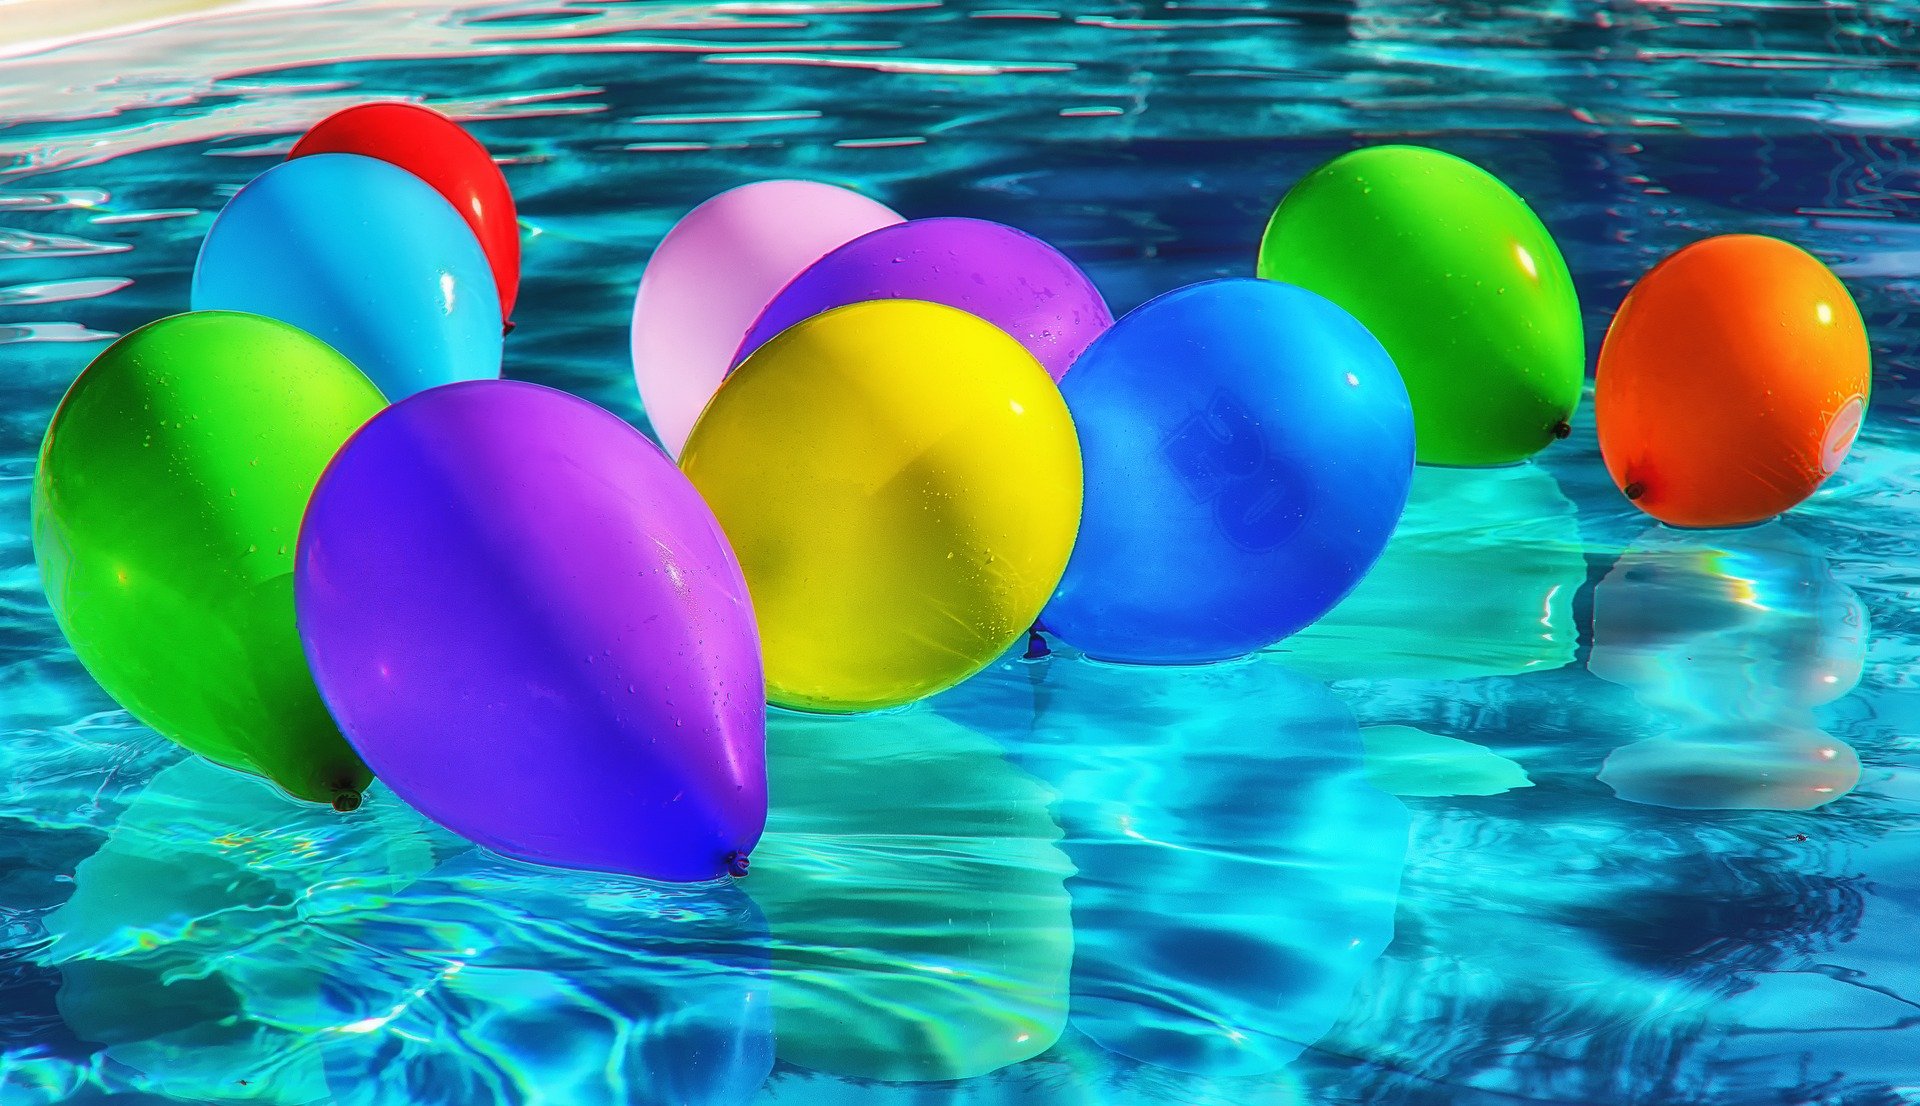 Balloons festively floating in a swimming pool. | Source: Pixabay.